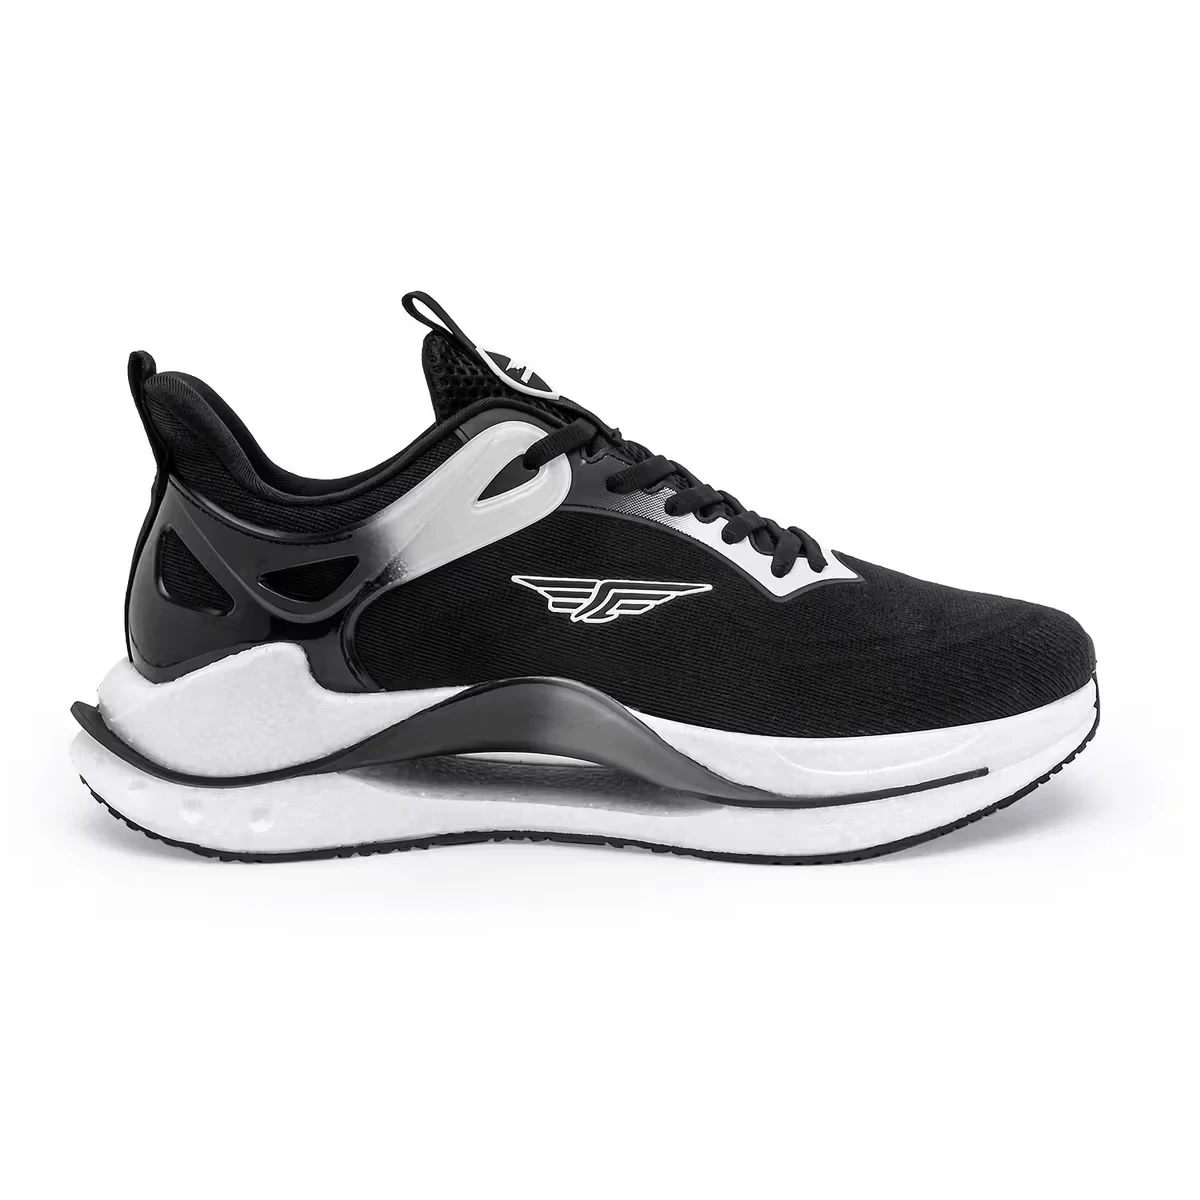 Men's Solid Black and White Sneakers Shoes